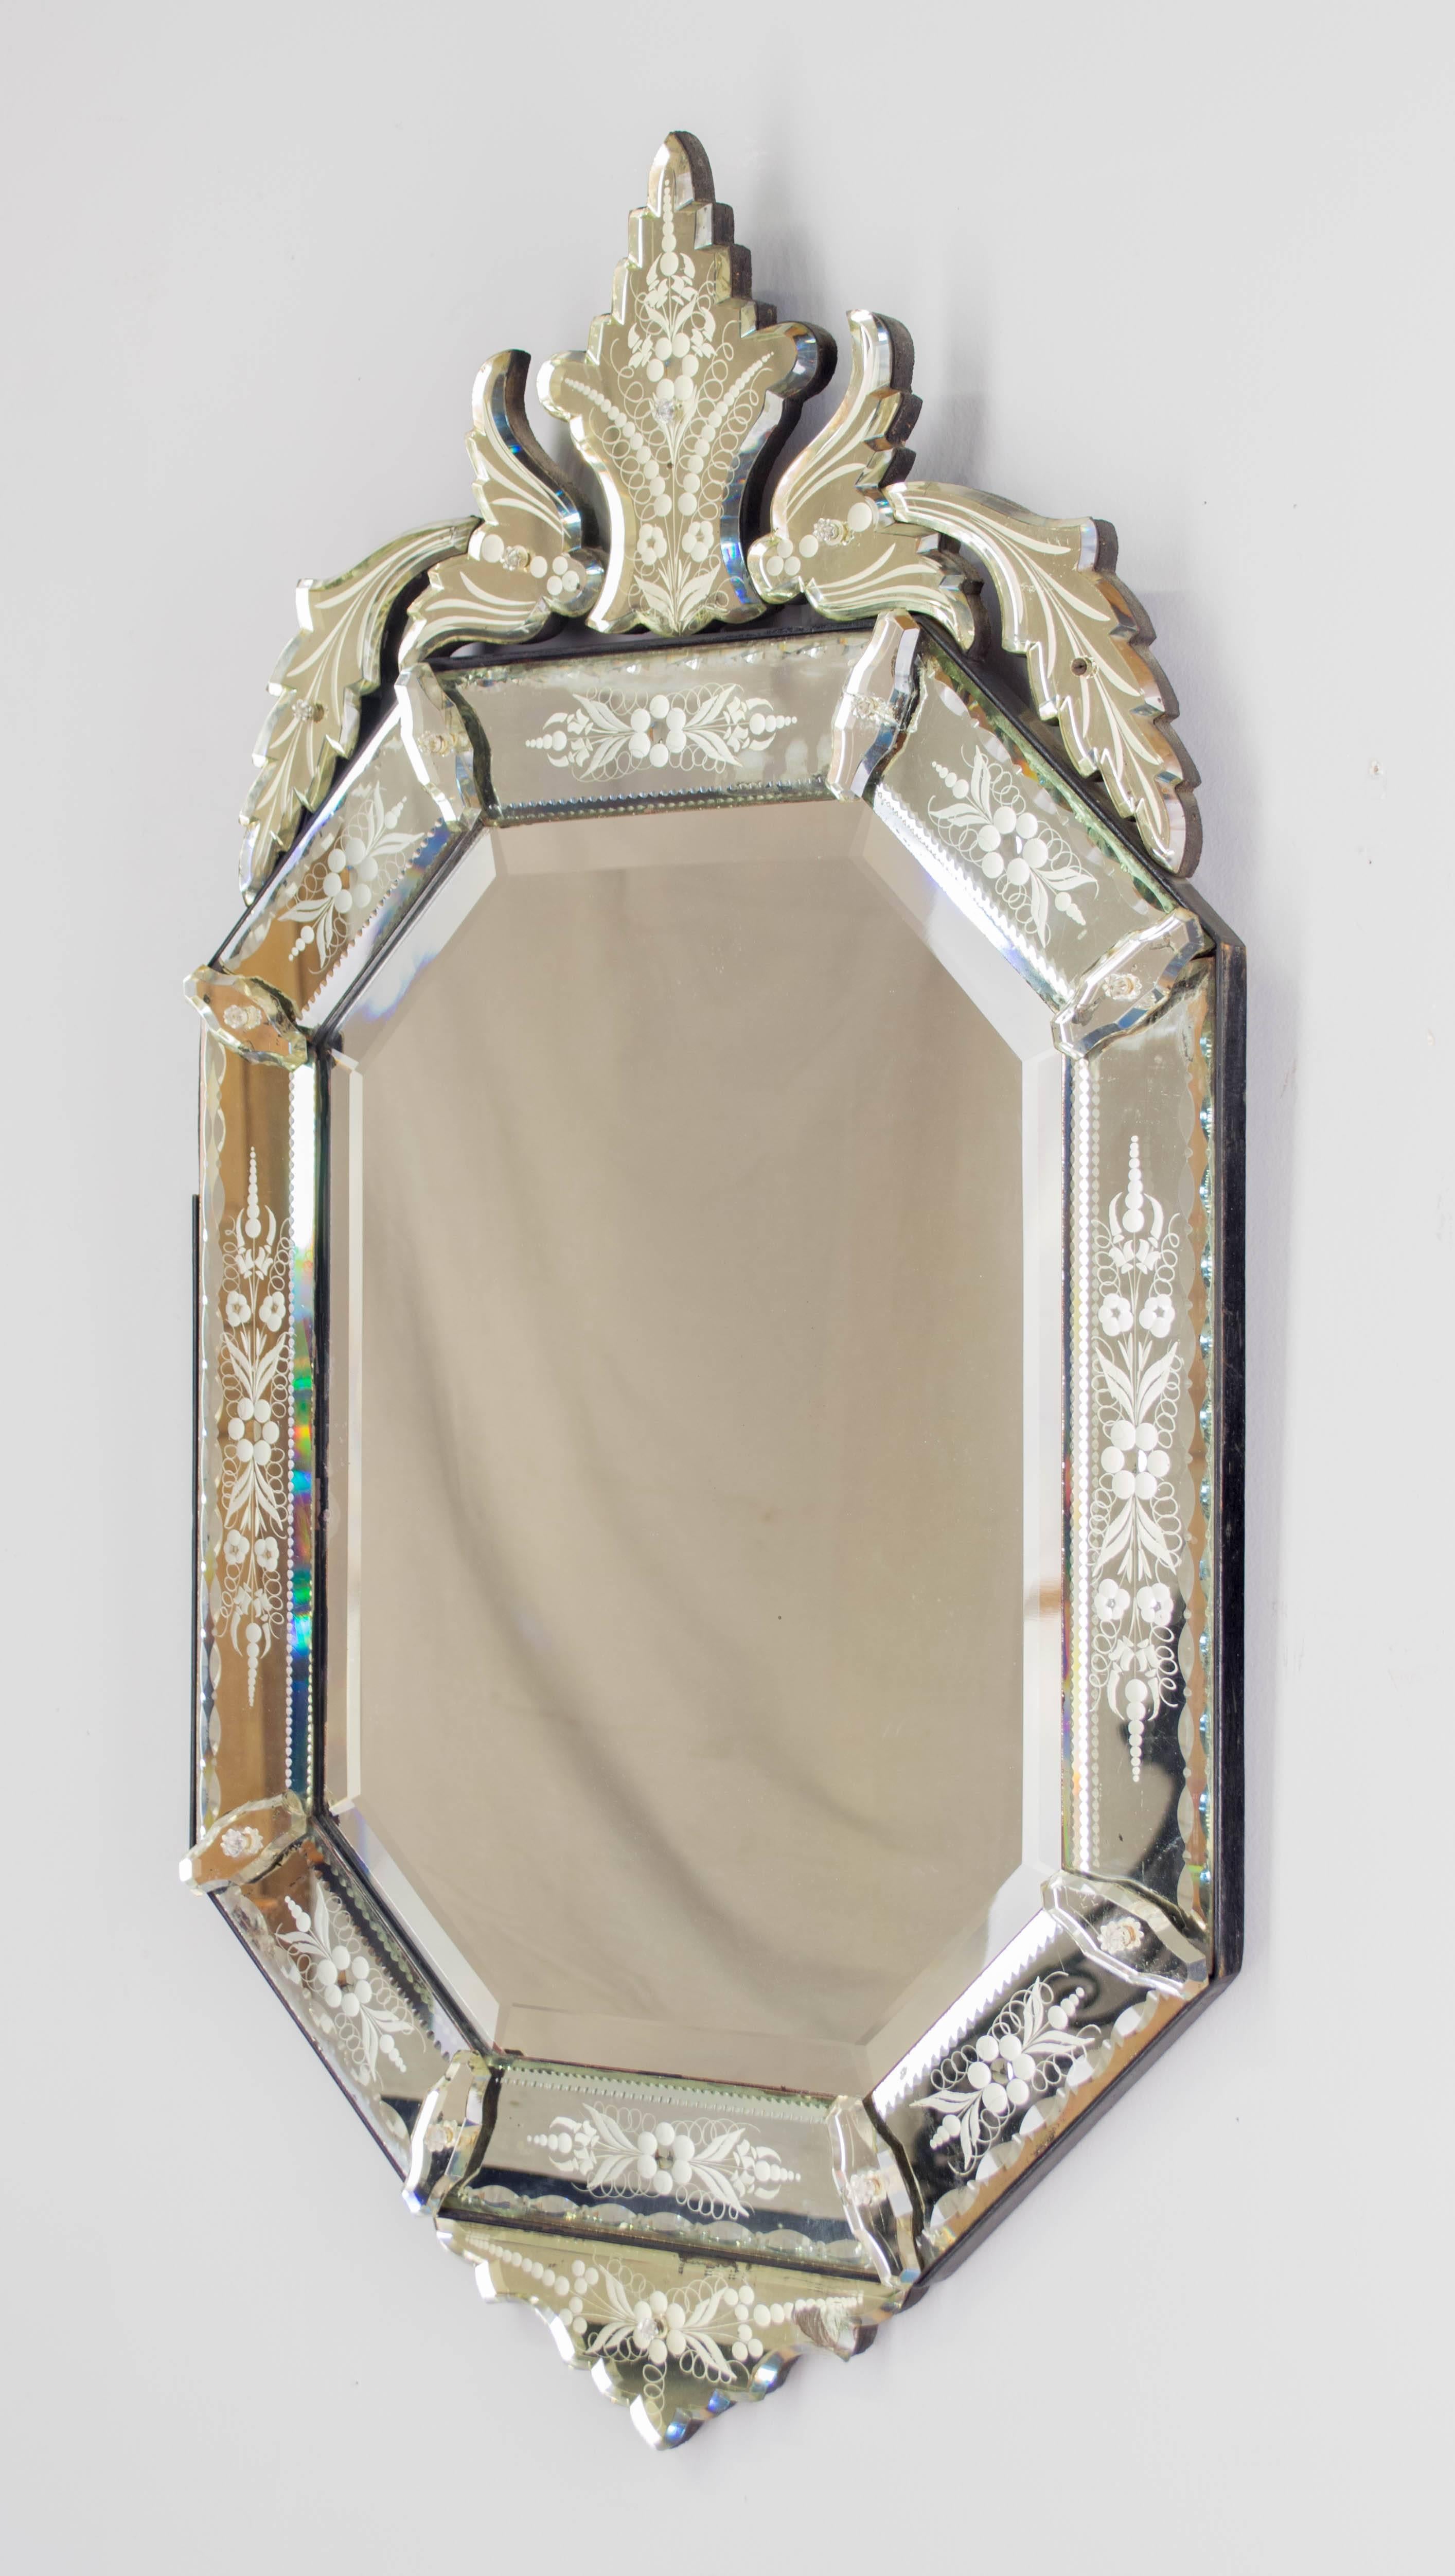 19th century Napoleon III Venetian mirror in an octagon shape with 22 separate pieces that have been cut, beveled and etched with lovely floral motif. Elegant shape of the crown and delicate etched details. One small piece in upper right corner is